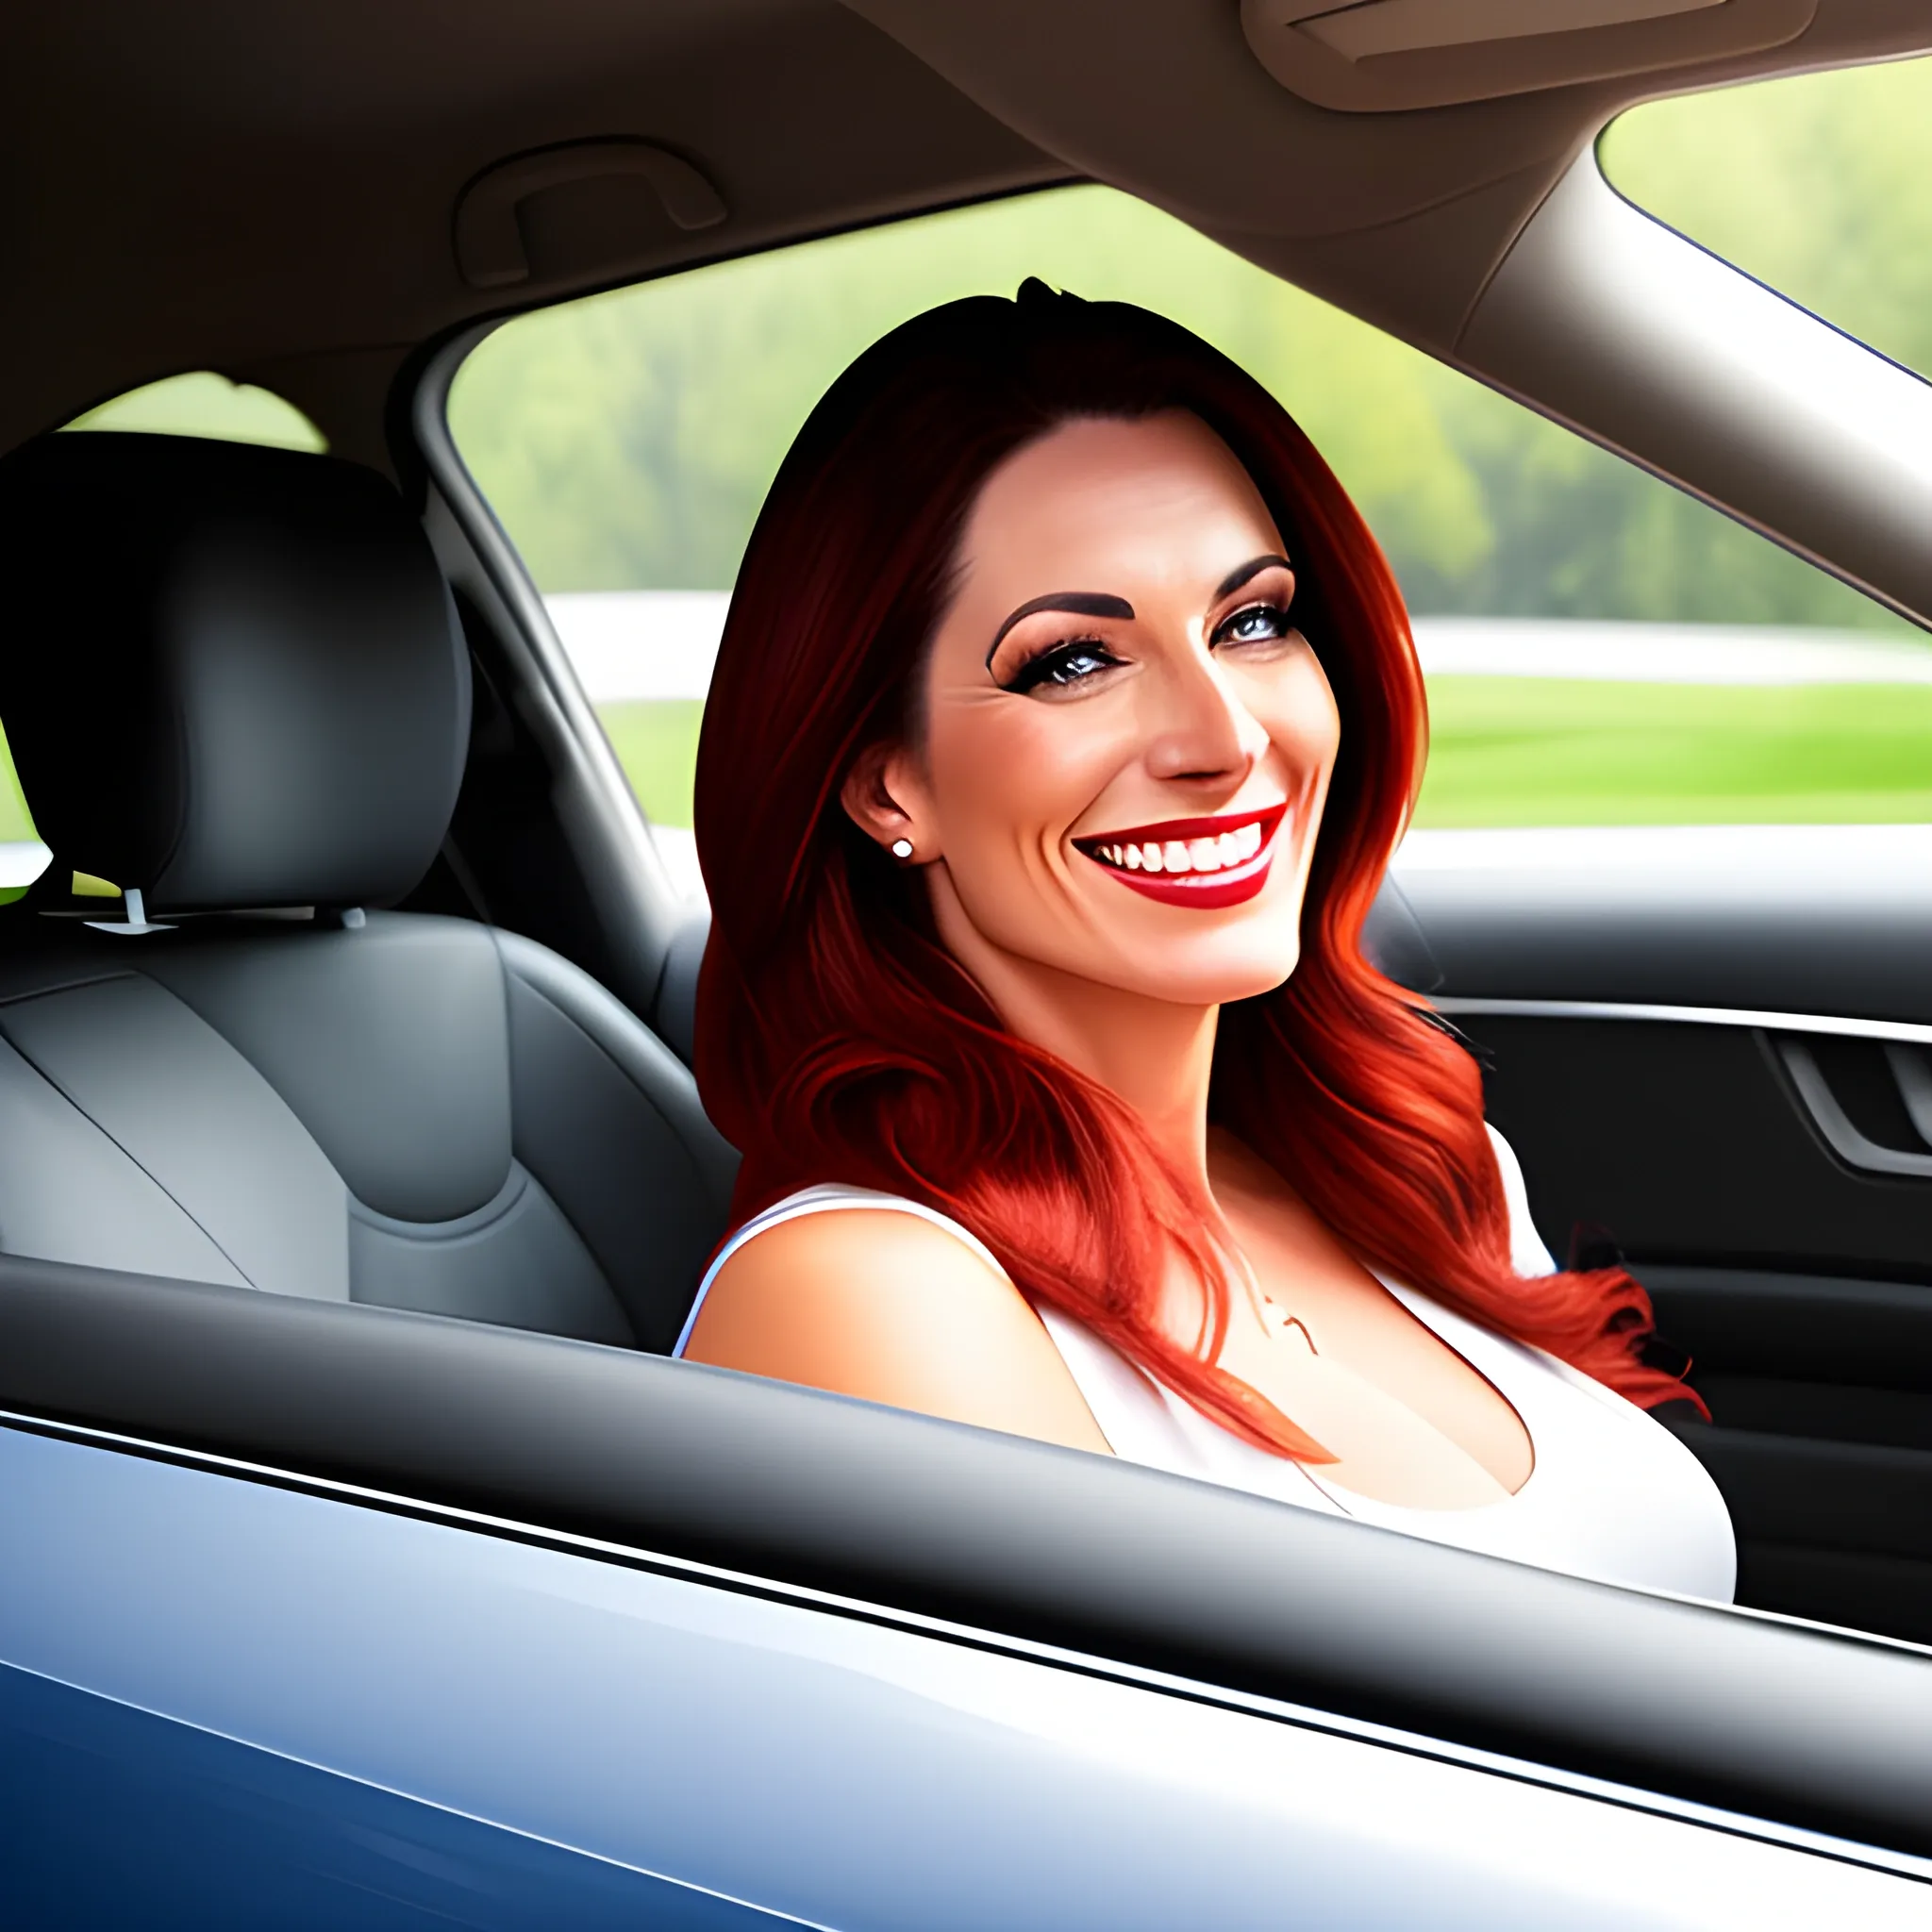 a woman sitting in a car smiling for the camera, a stock photo by David G. Sorensen, featured on shutterstock, american barbizon school, stock photo, creative commons attribution, stockphoto, Oil Painting